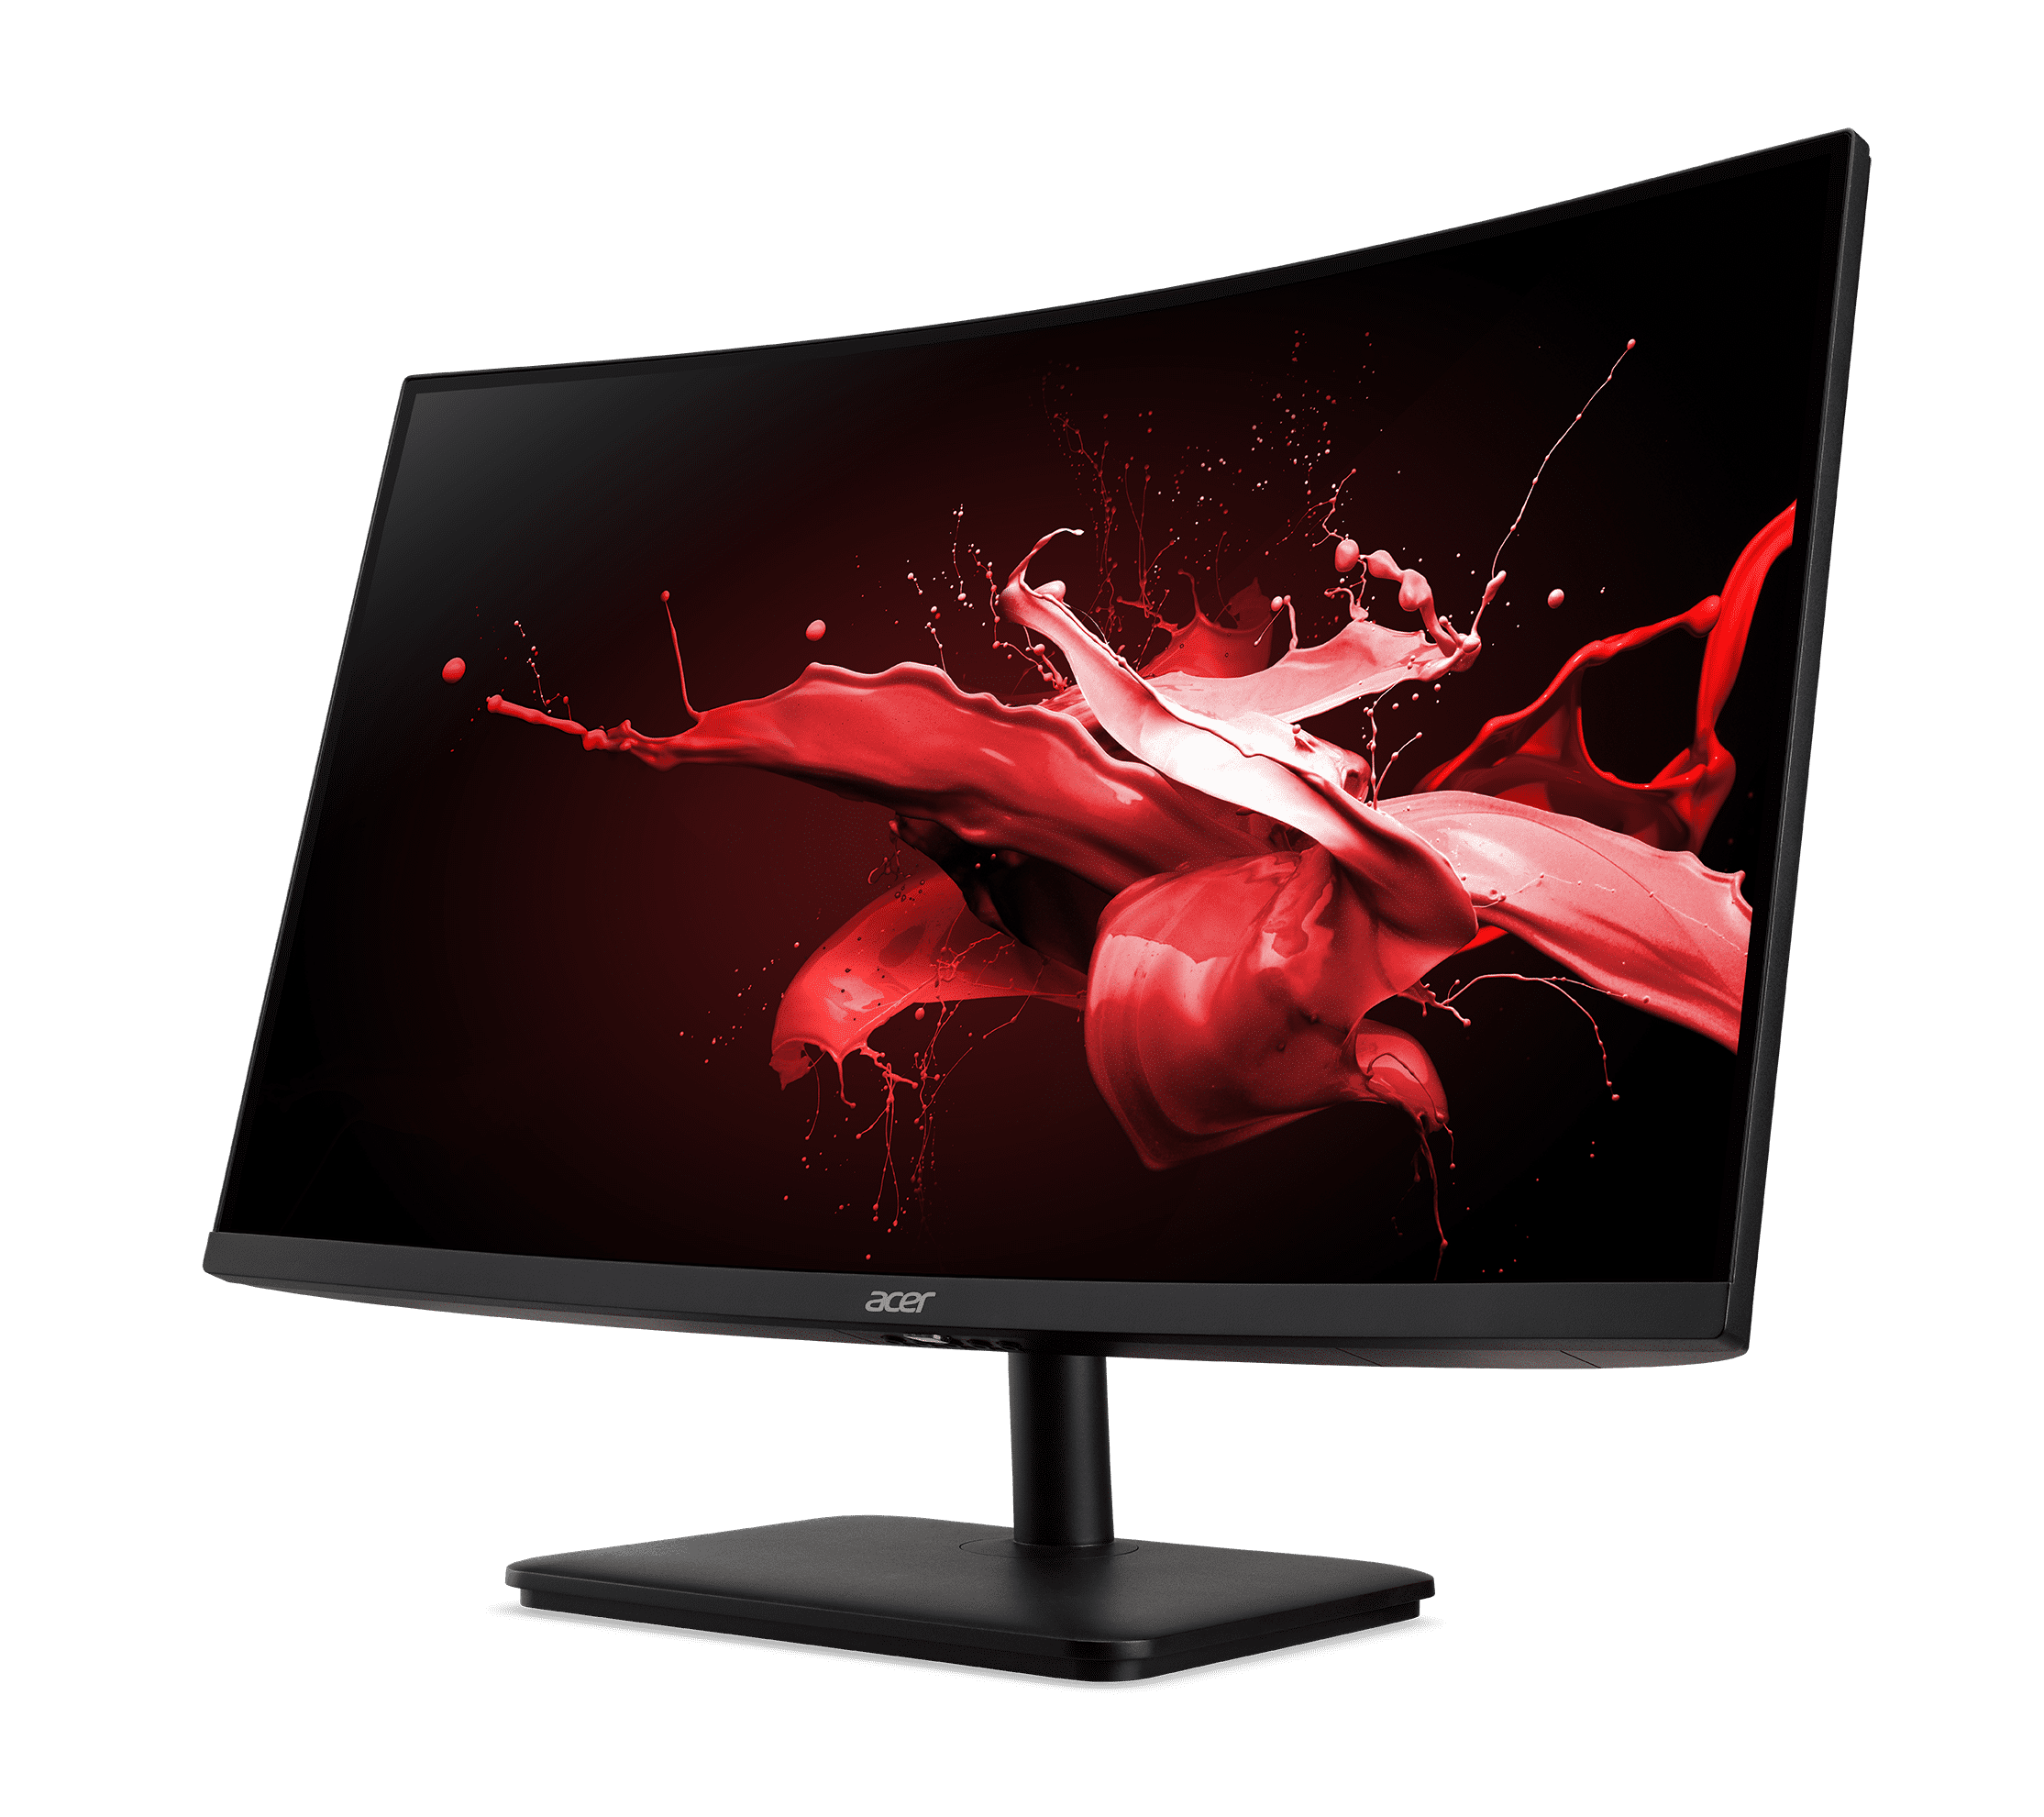 Norcent 27-inch FHD VA Gaming Curved Monitor with Rainbow Lights, 240Hz  Refresh Rate, Eye Care 1080P Display, FreeSync G-Sync Compatible, 1ms  DisplayPort, HDMI, DP and Speakers 